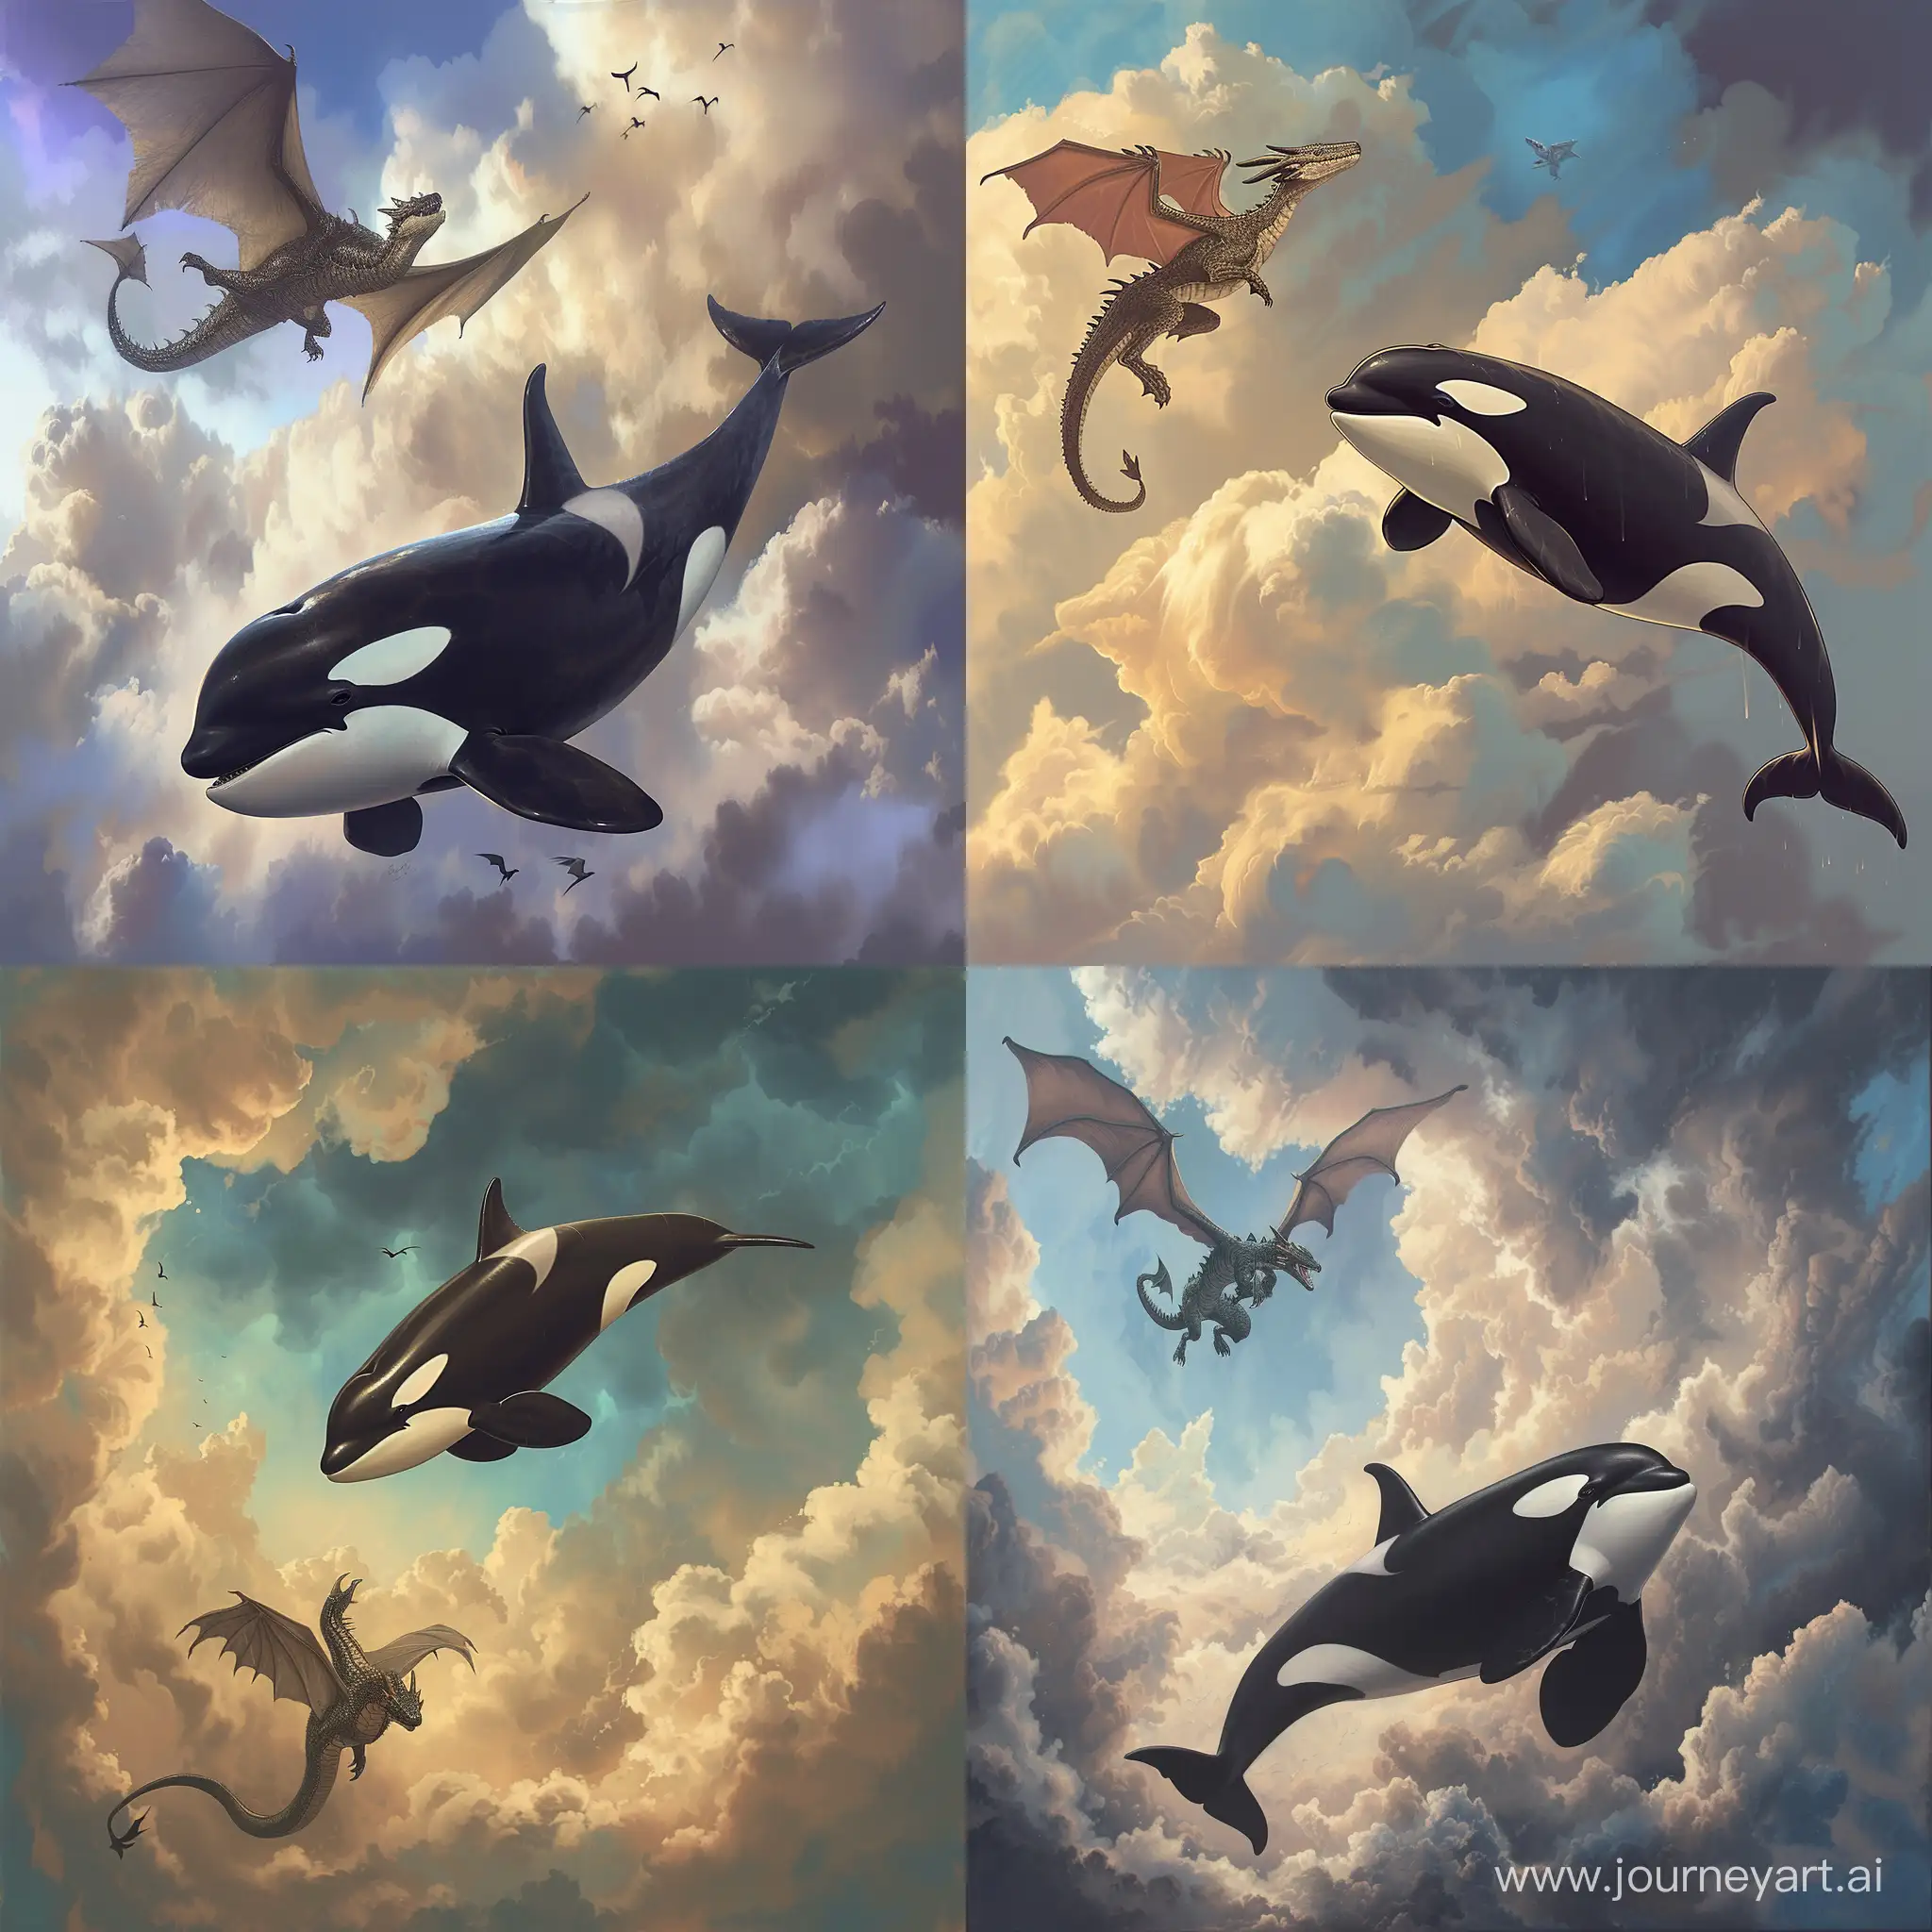 A-Majestic-Orca-Whale-Soars-Through-Clouds-Accompanied-by-a-Mystical-Dragon